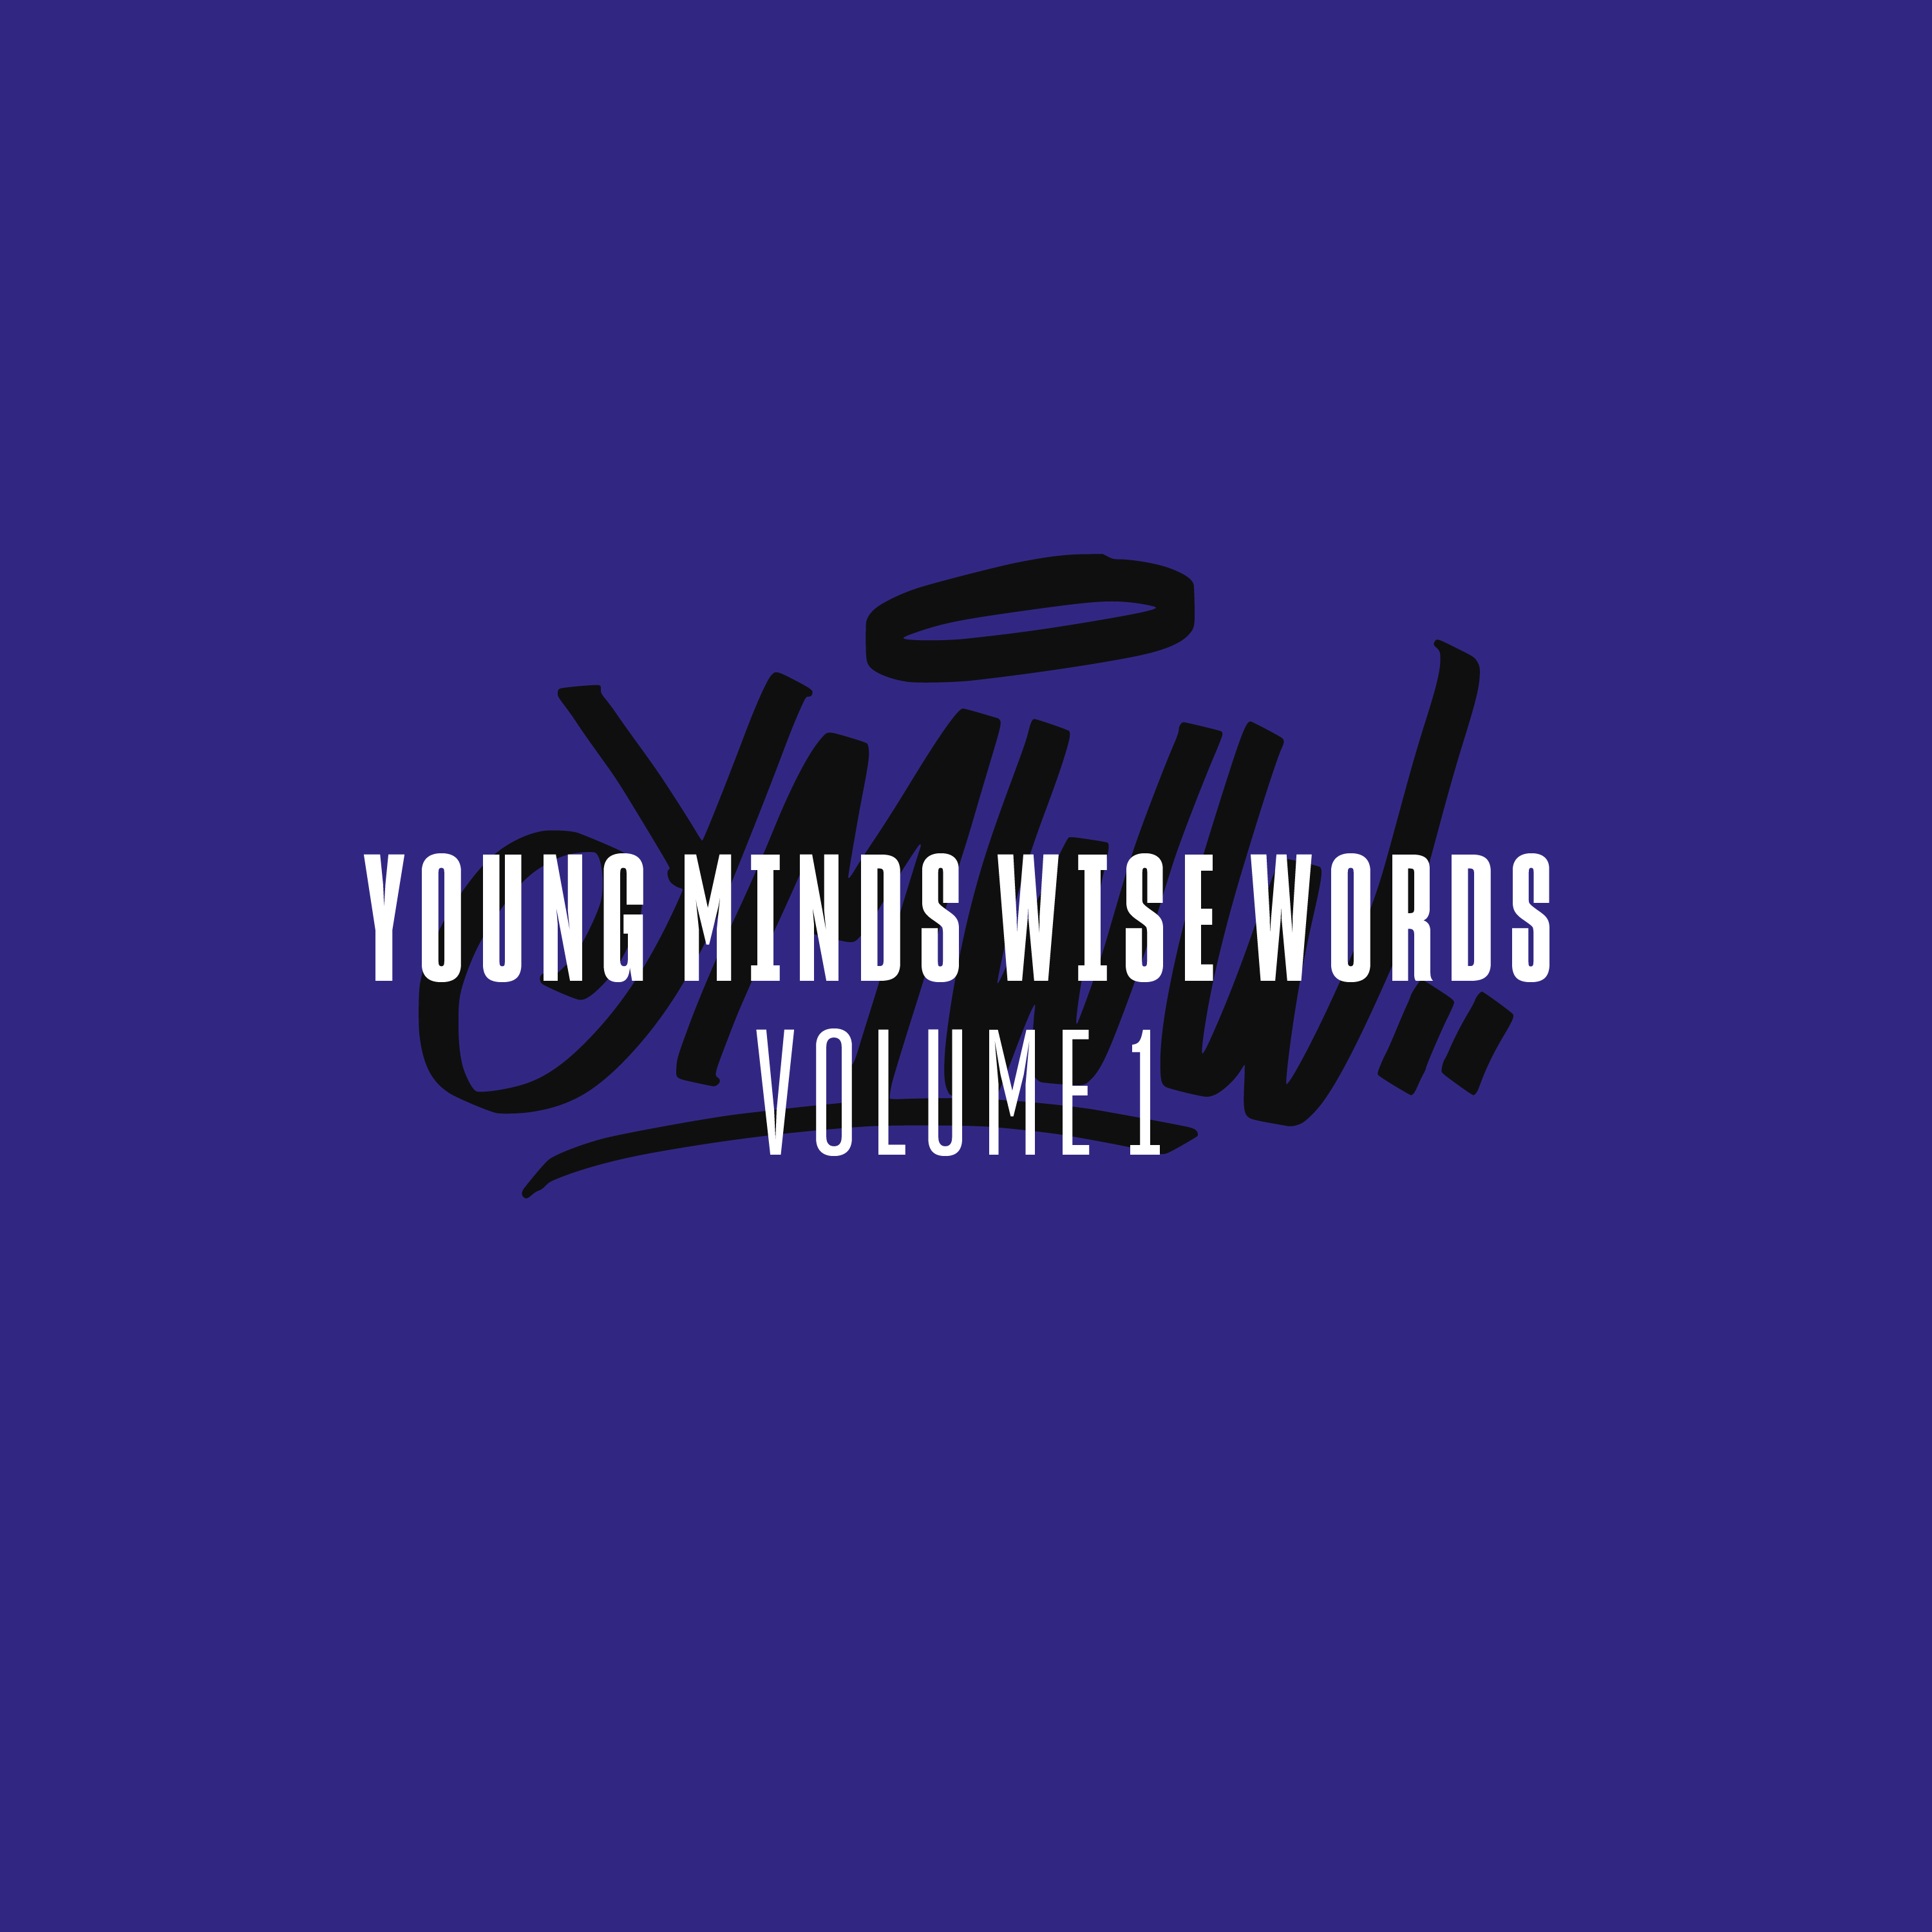 Young Minds Wise Words Volume 1